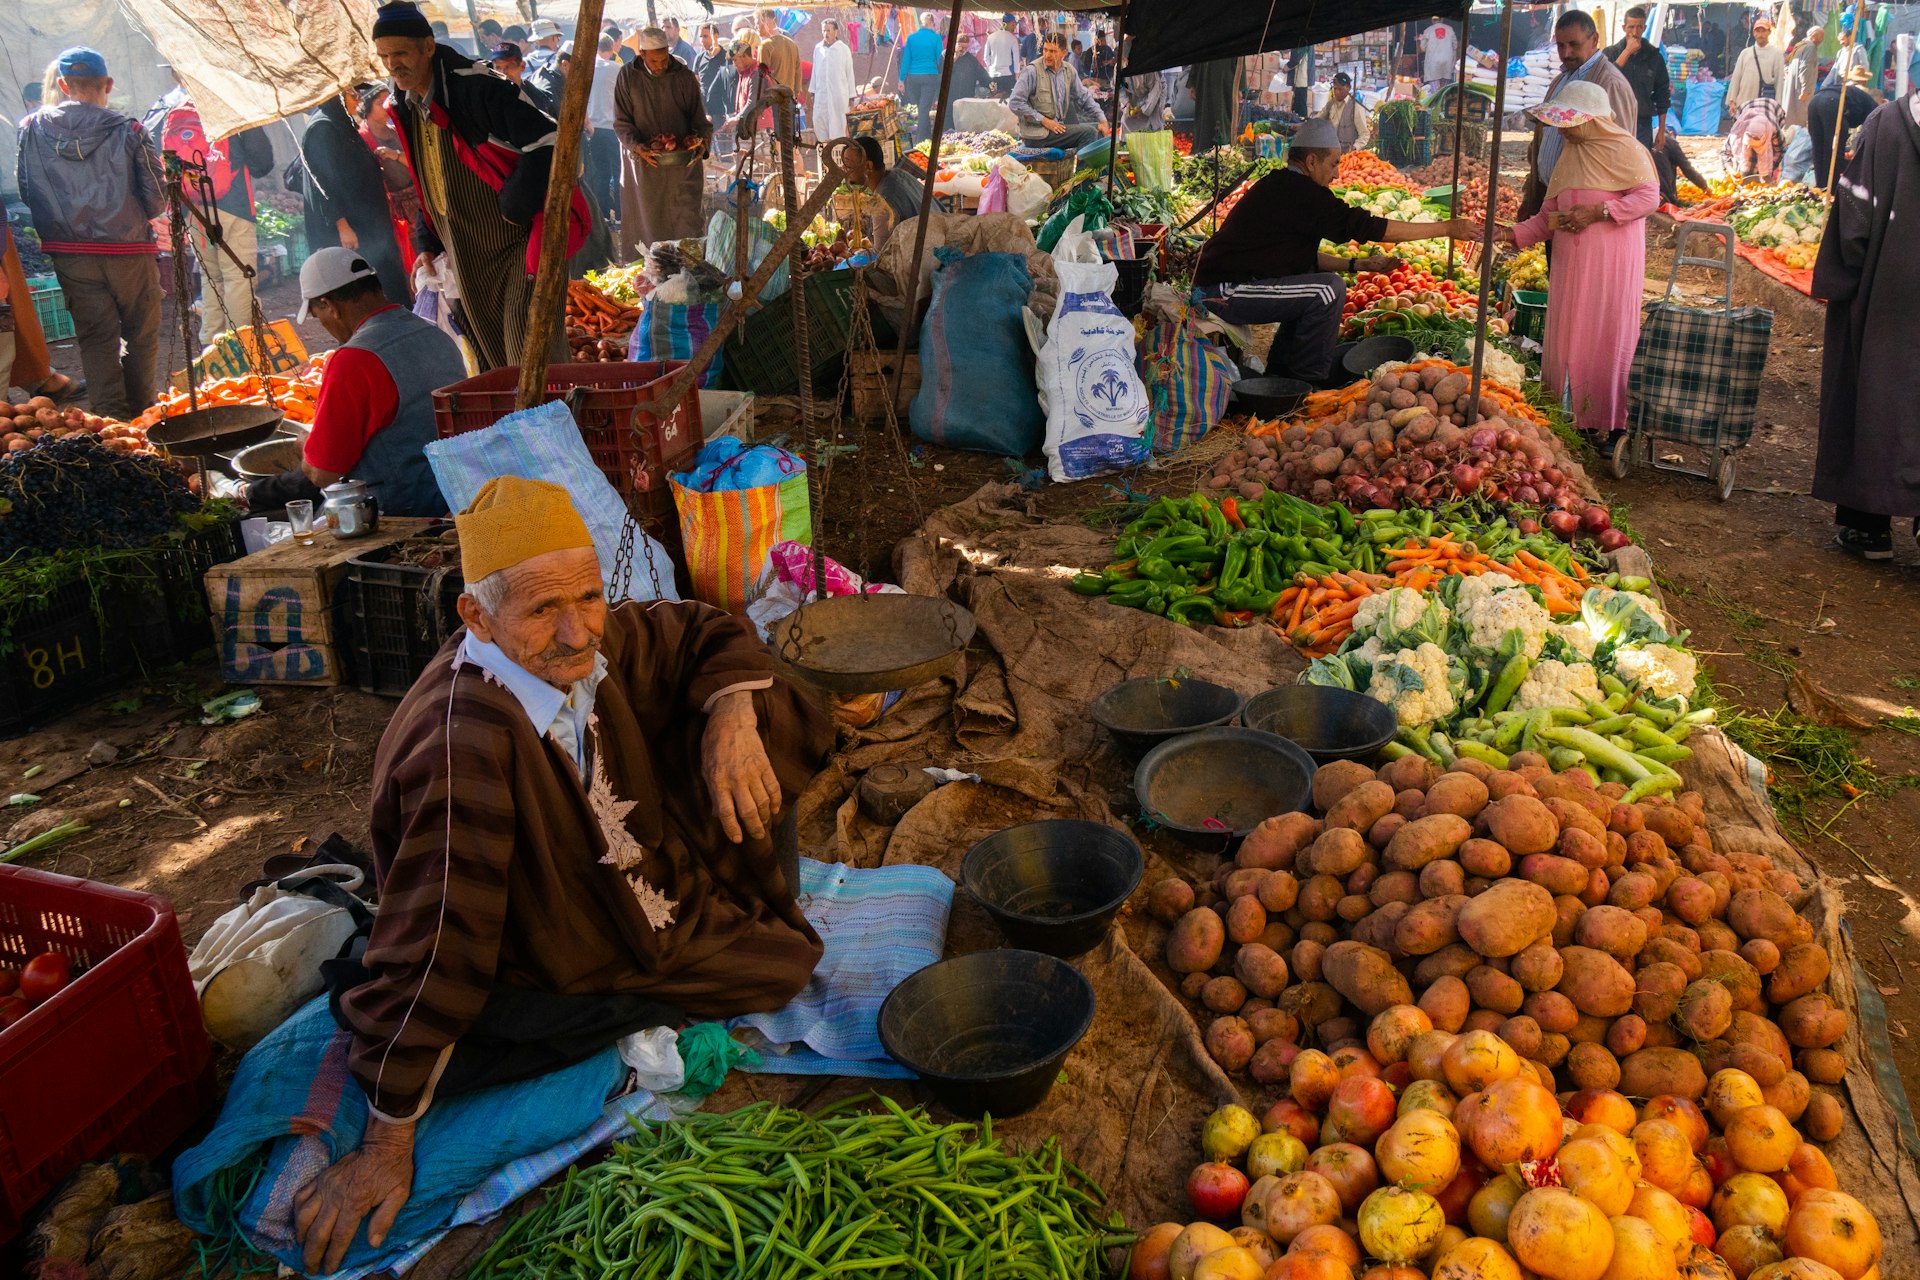 A trader in the market at Asni near Marrakesh